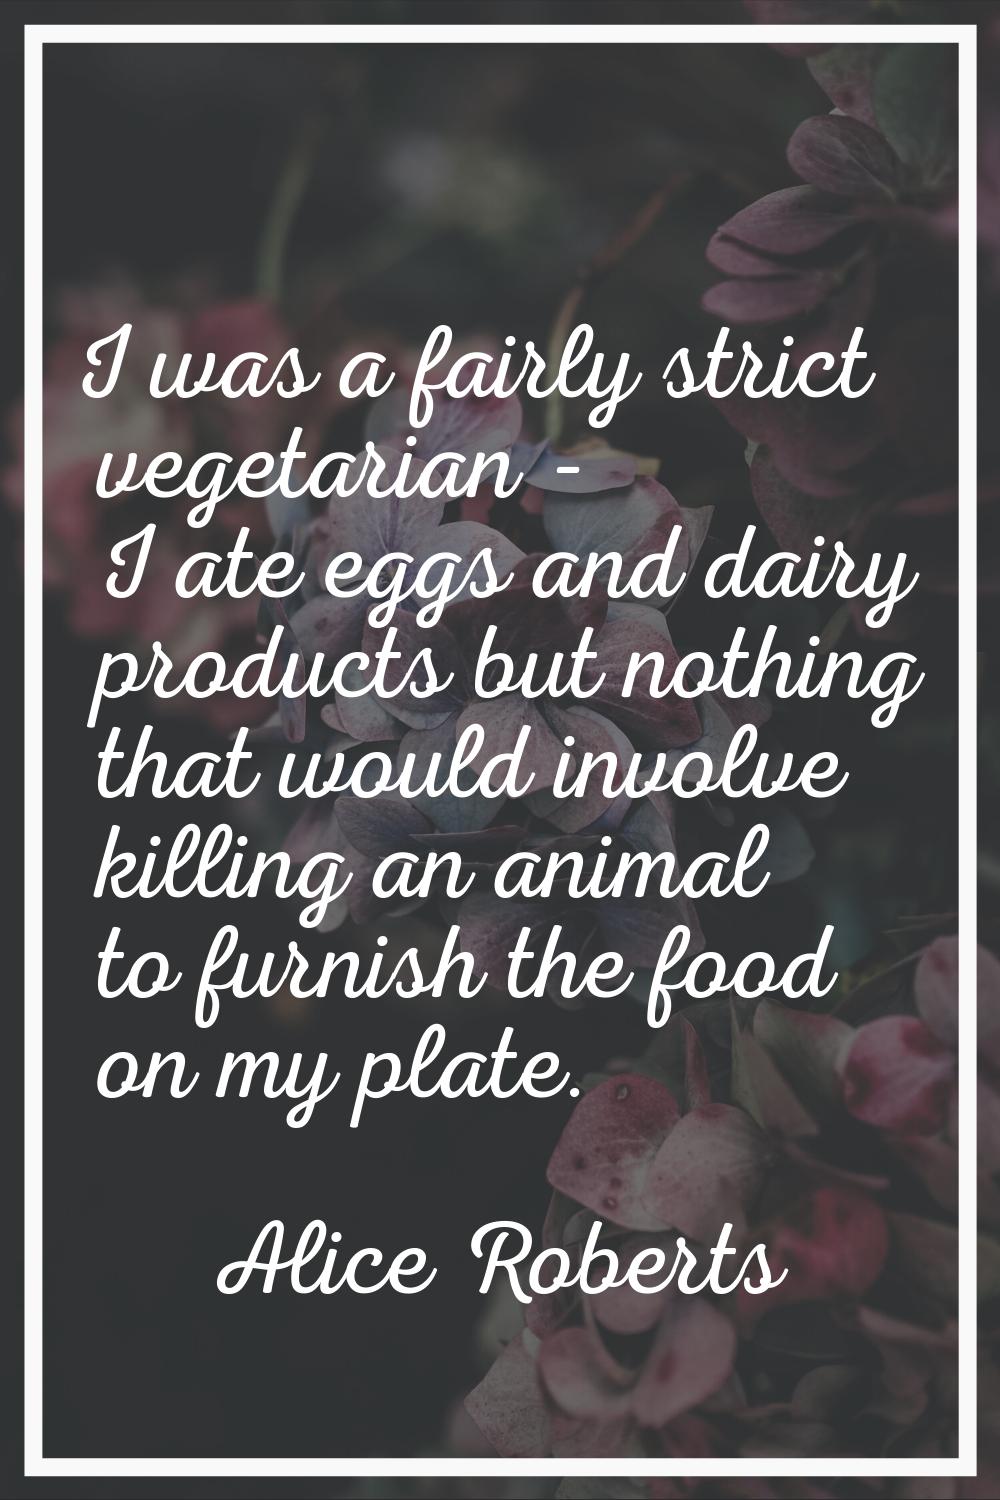 I was a fairly strict vegetarian - I ate eggs and dairy products but nothing that would involve kil